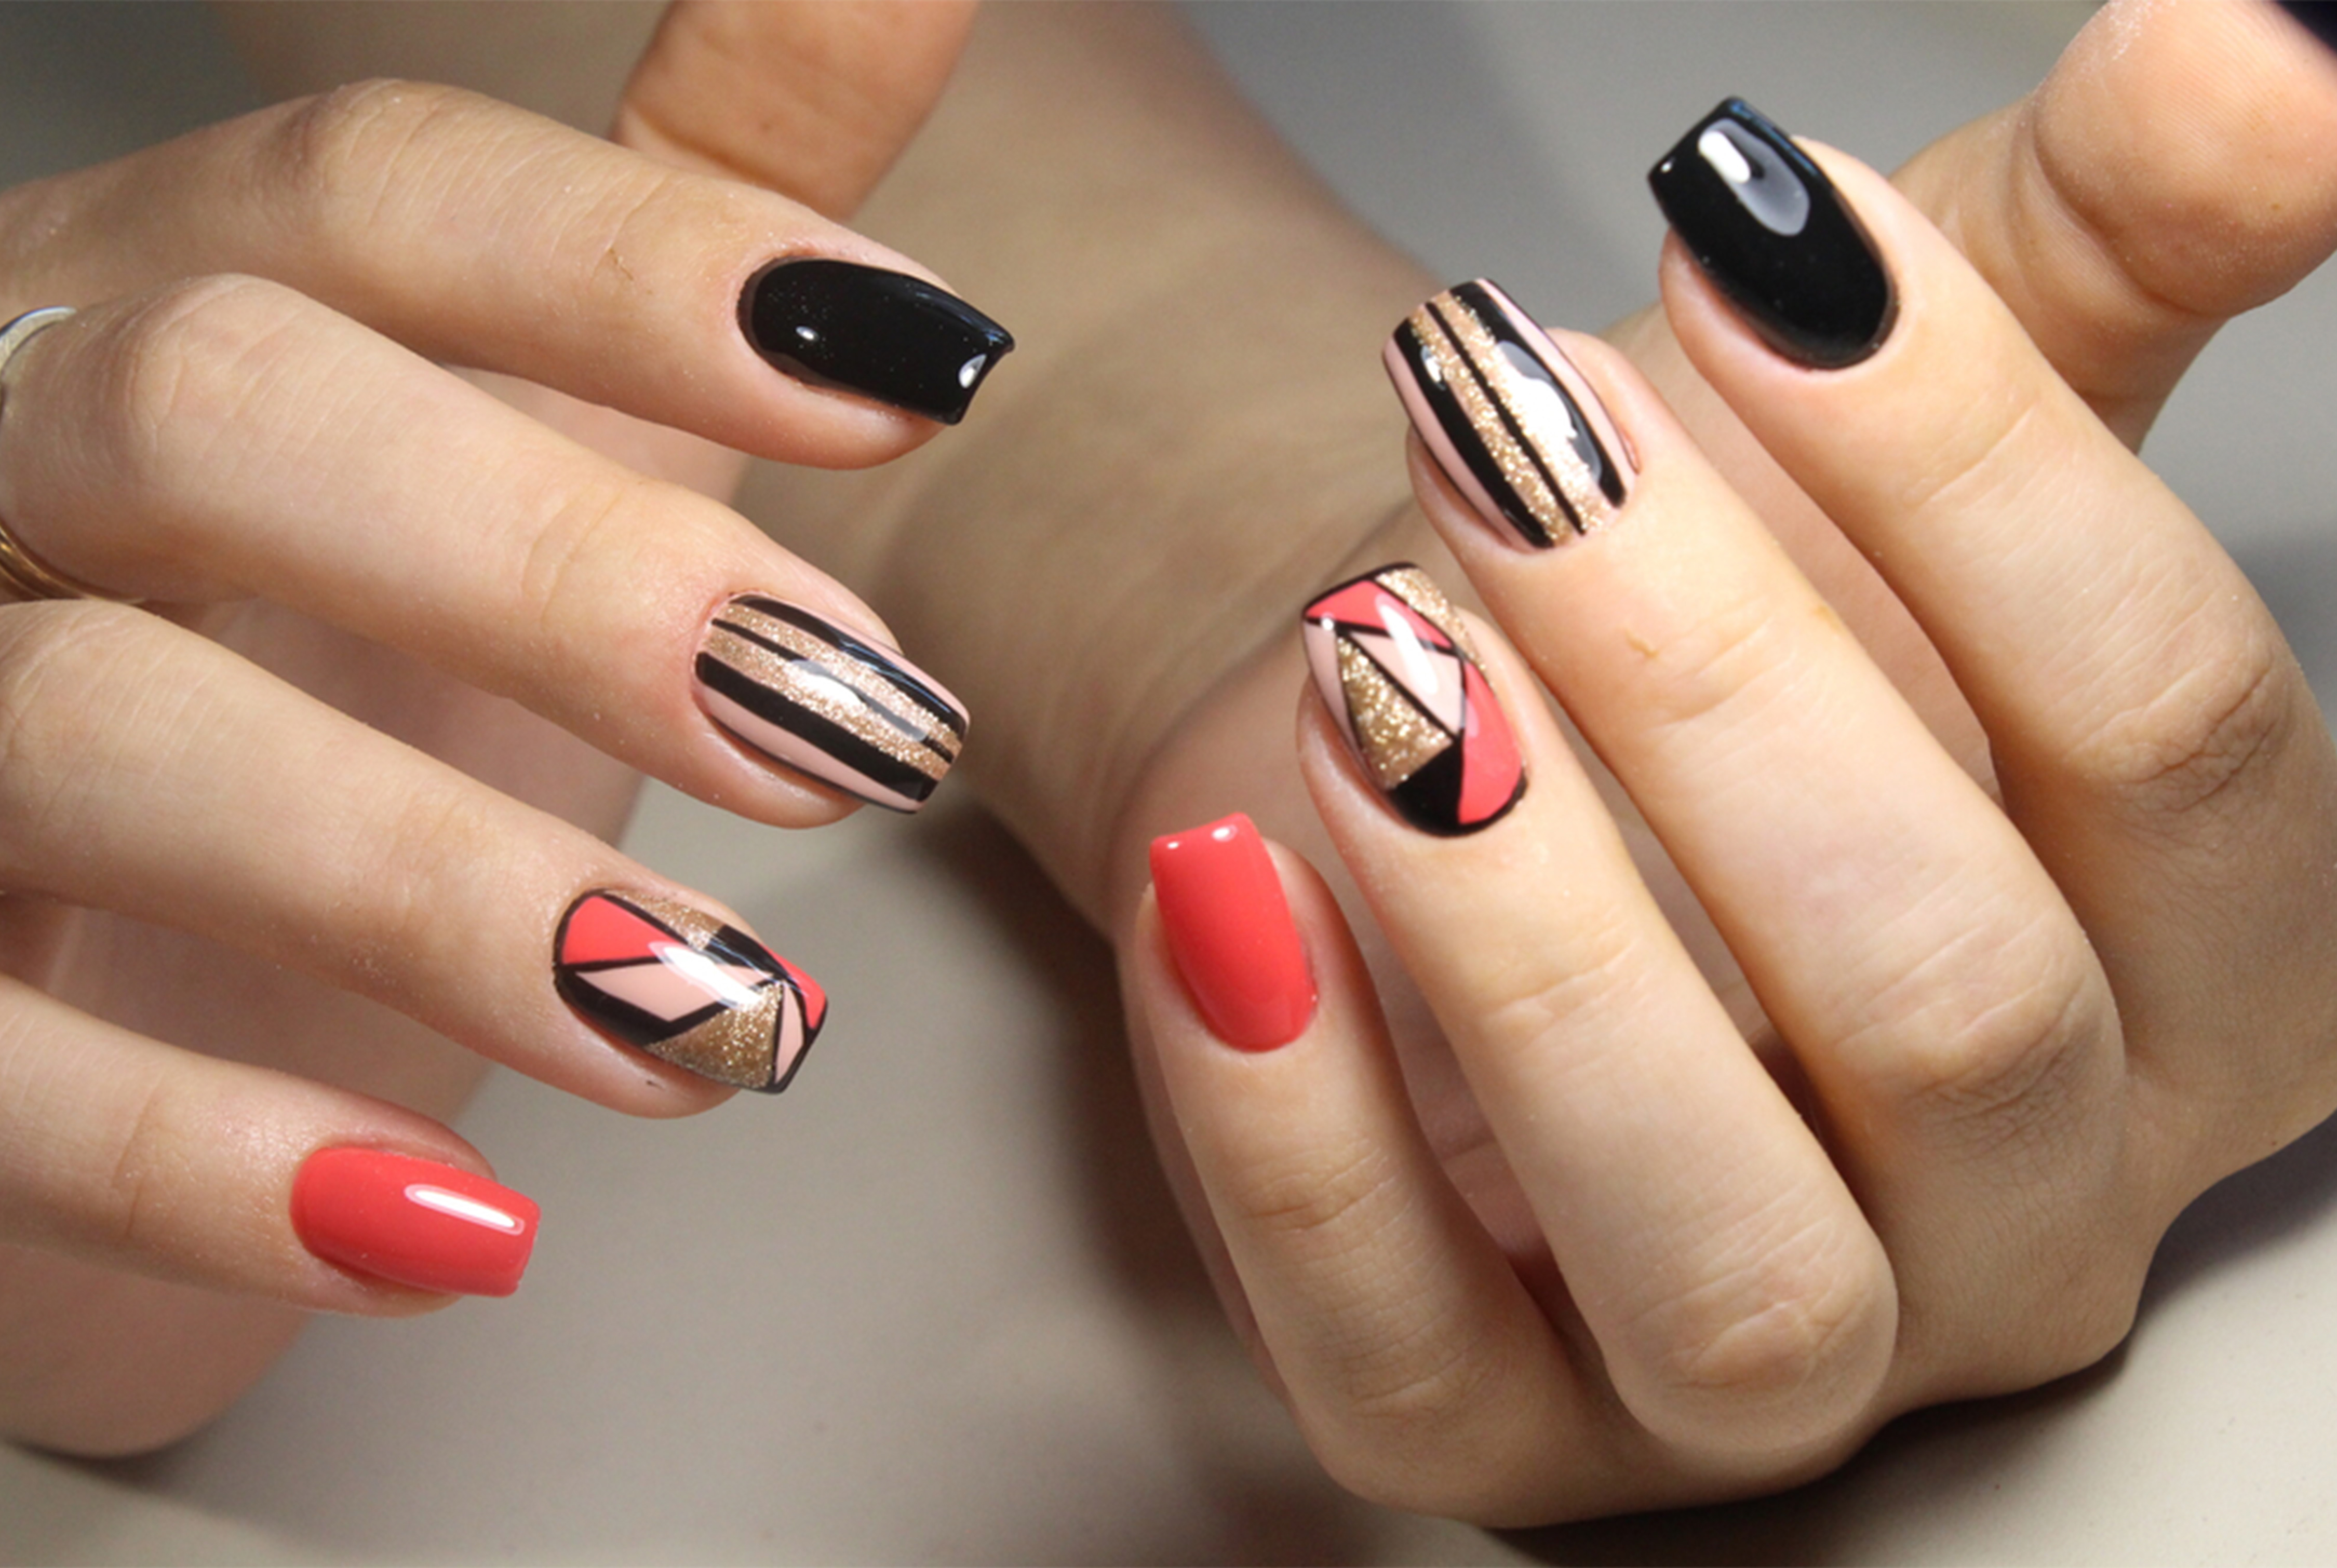 Global Nail Art Instagram Accounts to Follow - wide 4